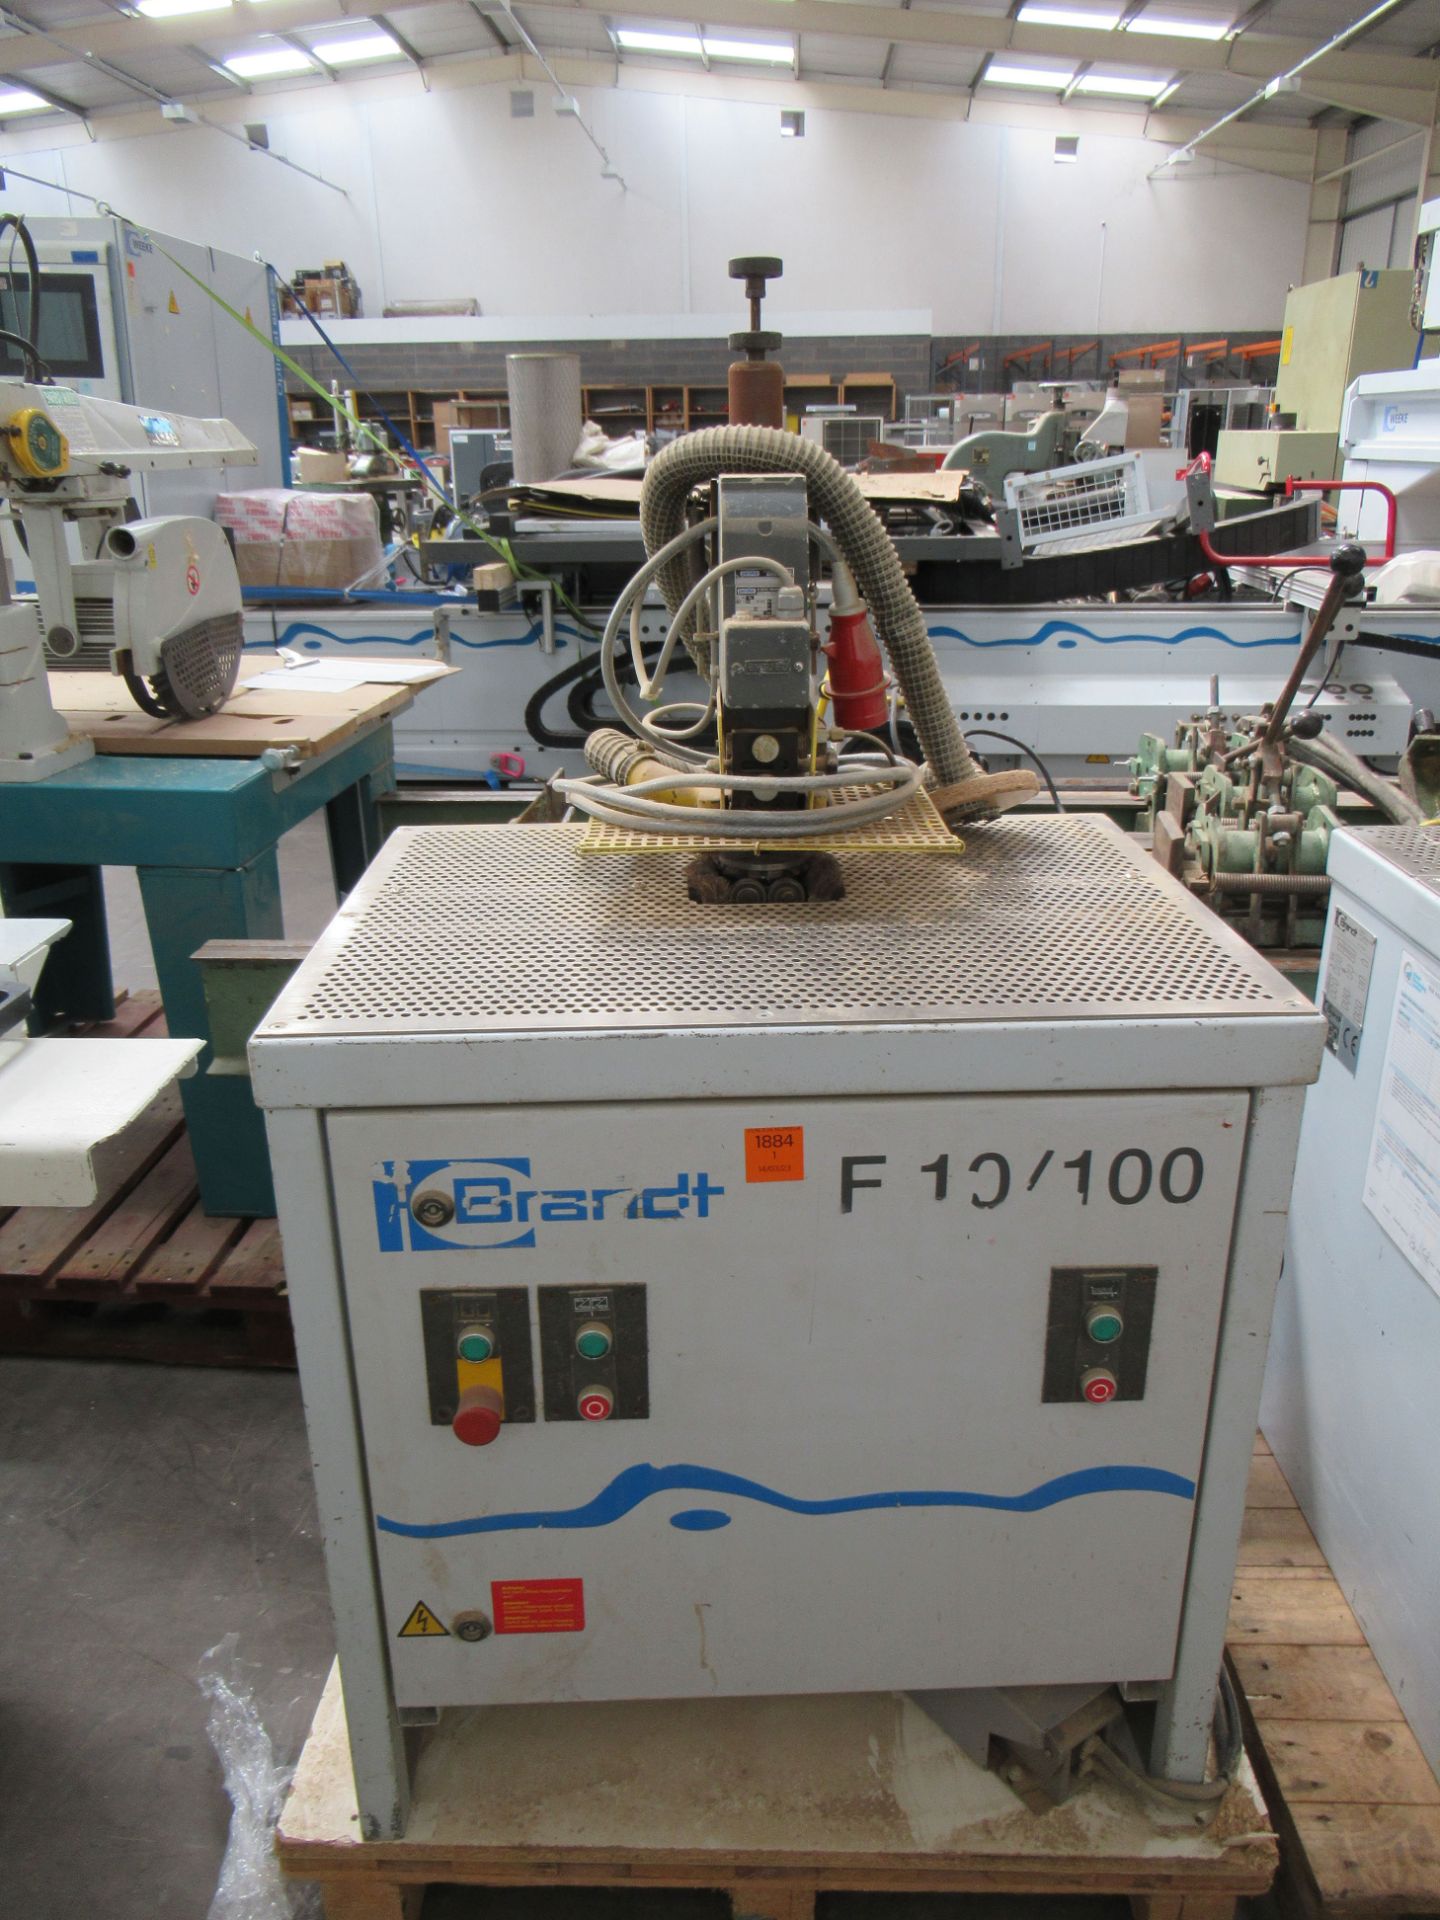 Brandt F10/100 Top and Bottom Contour Edgebander and Brandt KTD 51 Contour Edgebander - both 3ph. - Image 2 of 12